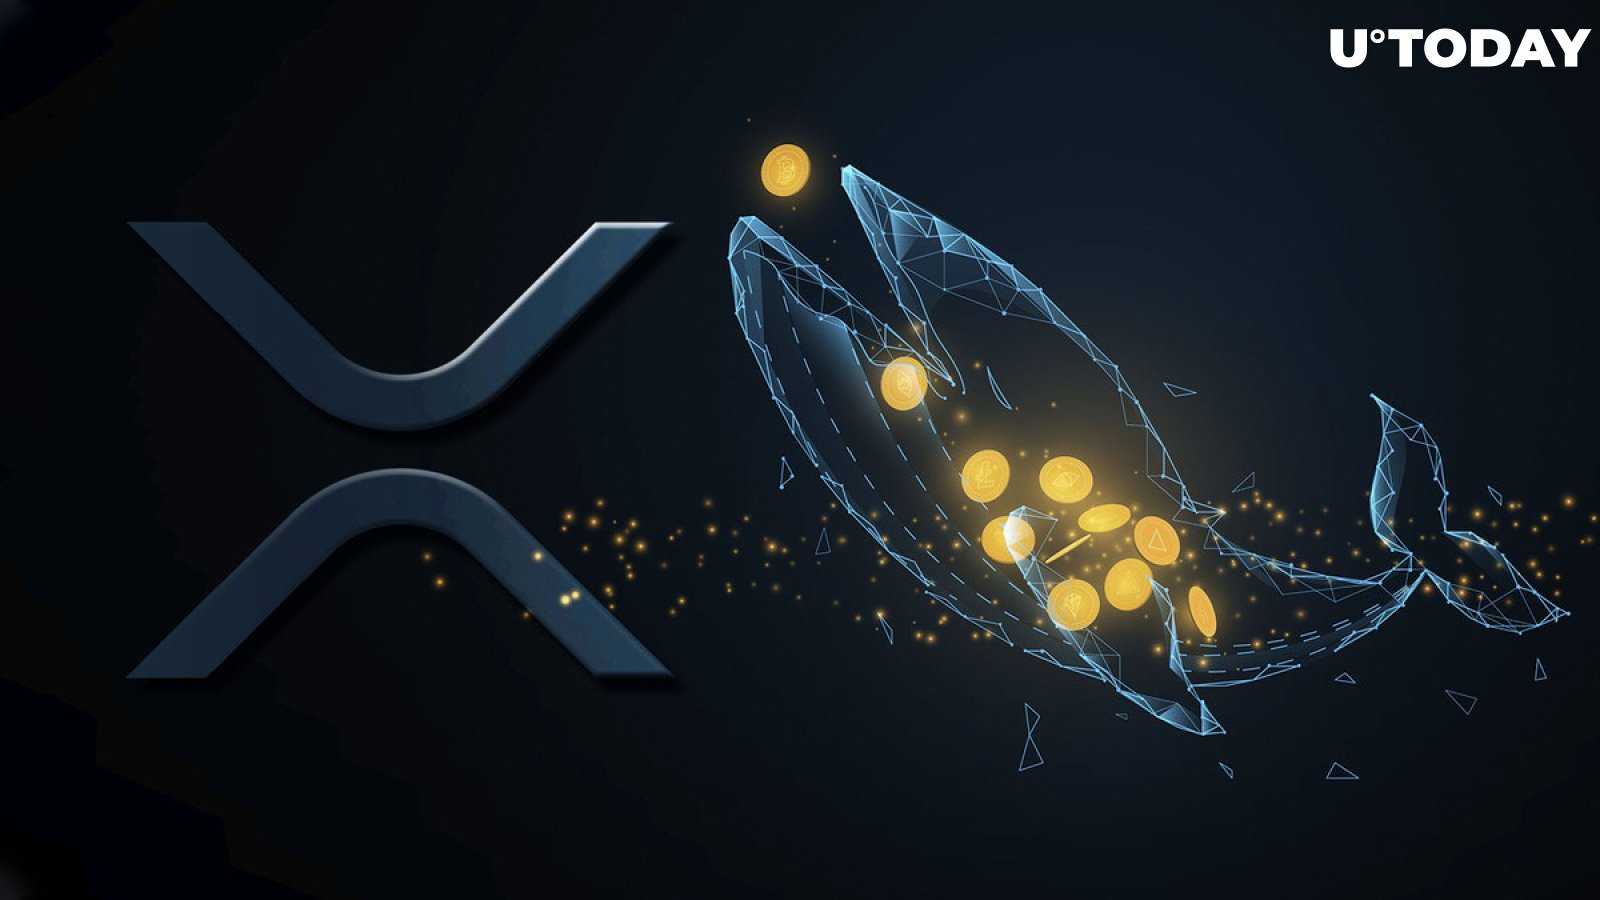 Whales Shift 550 Million XRP as They Might Be Selling